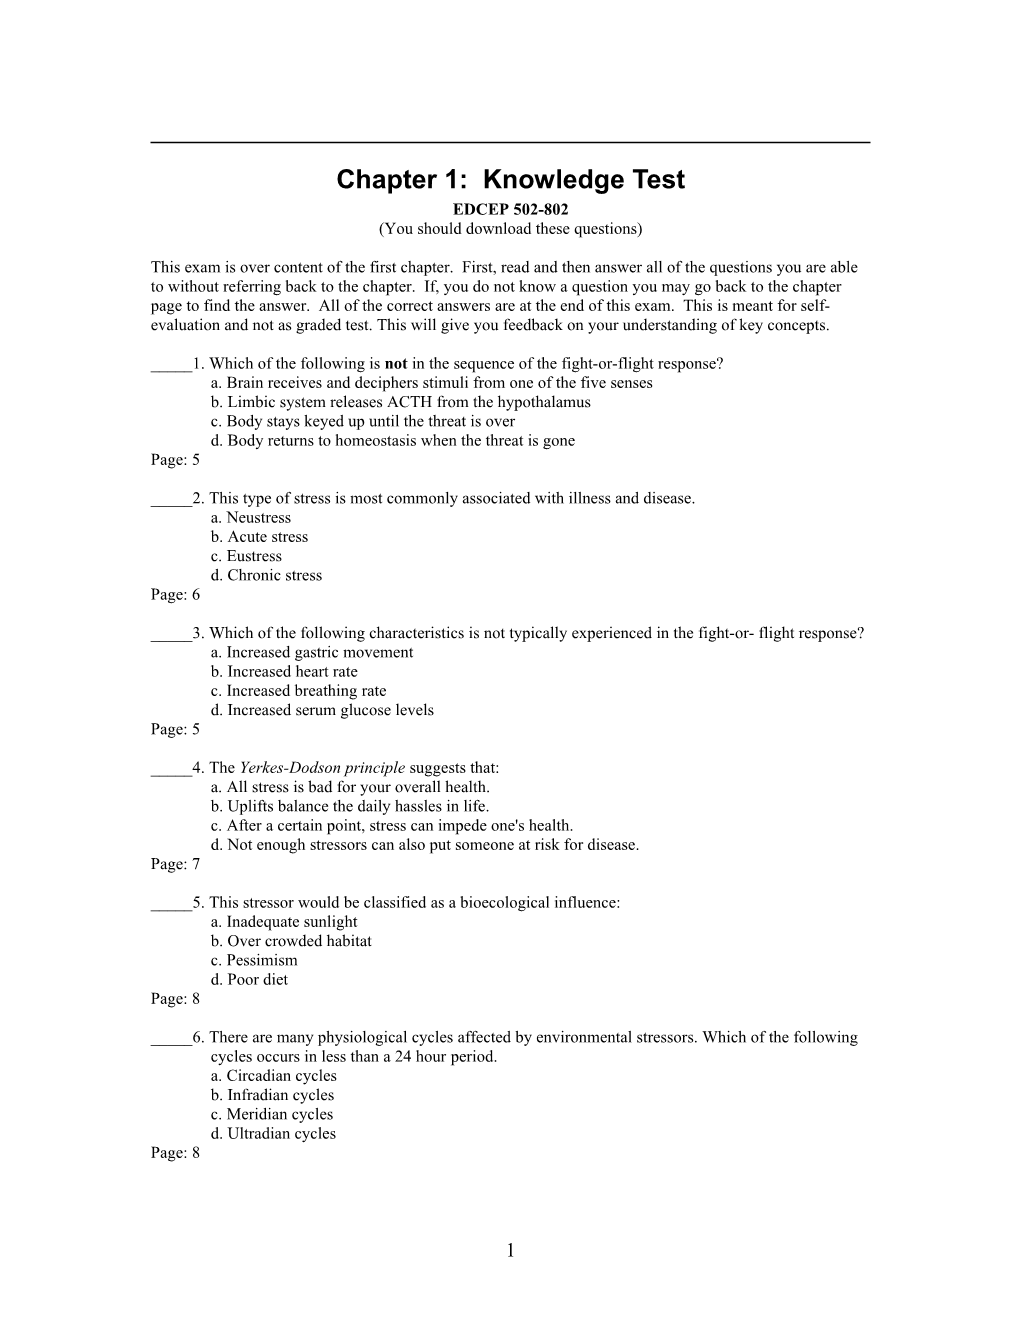 Chapter 1: Knowledge Test